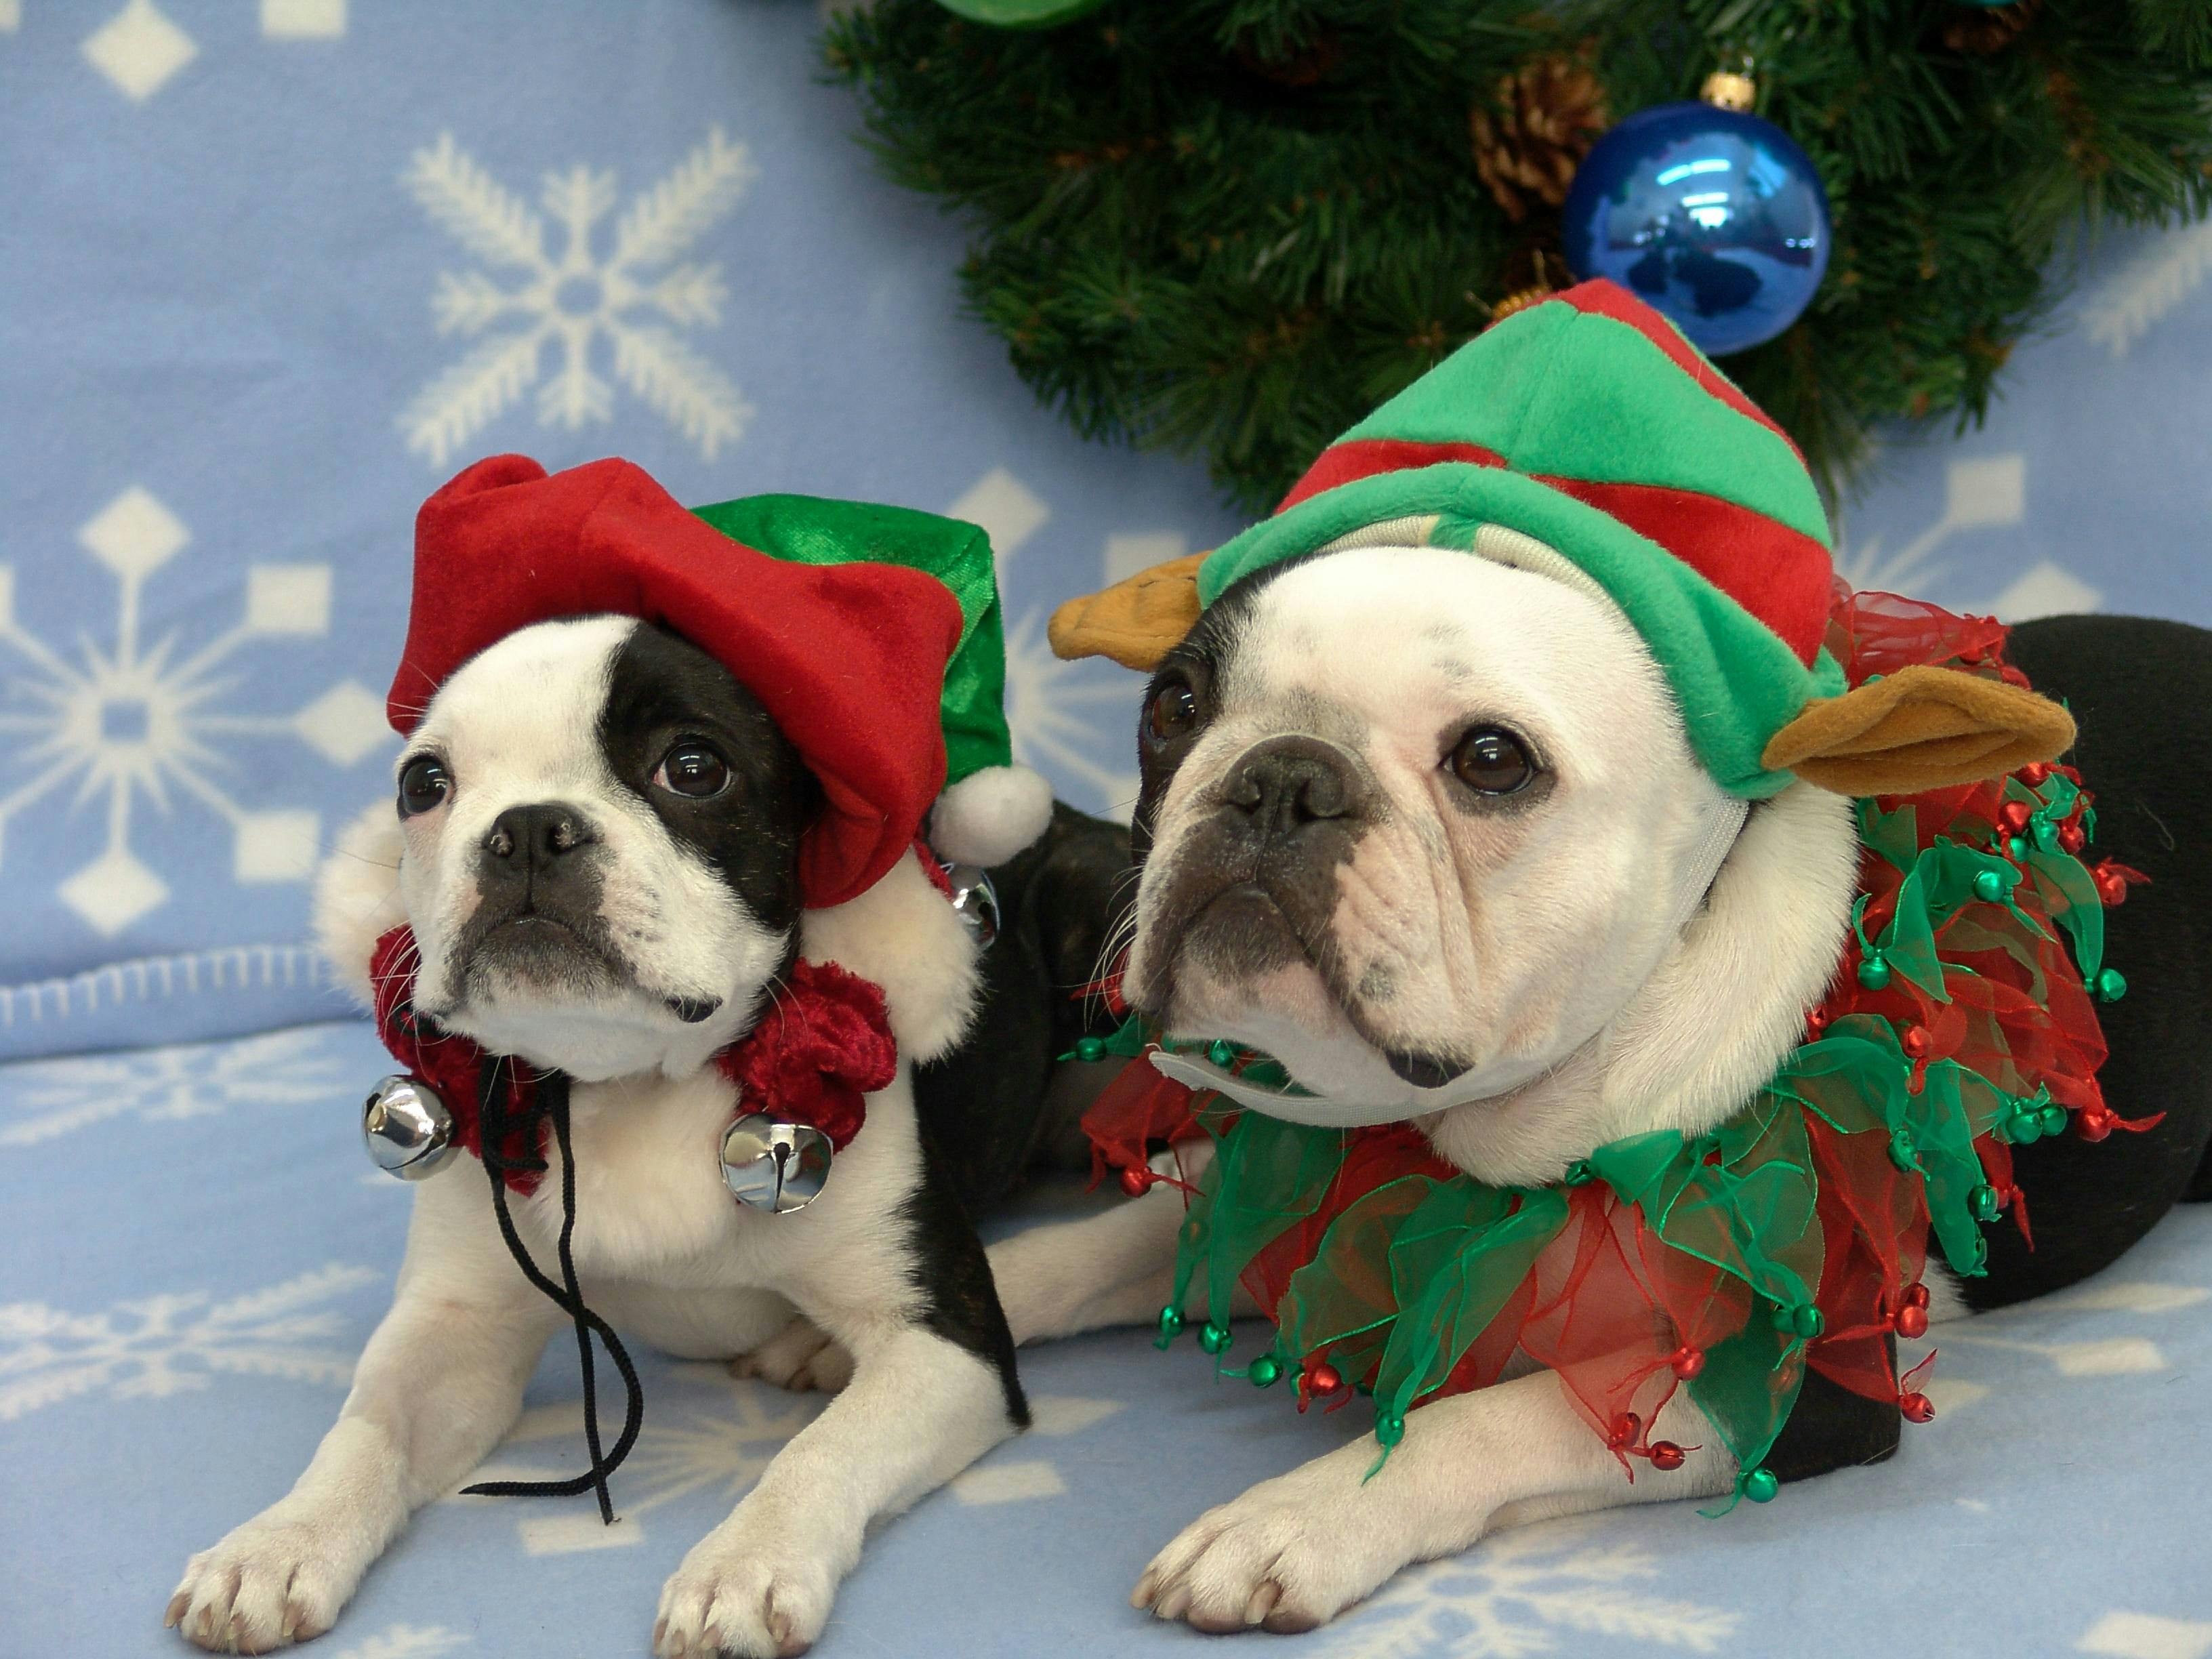 2 dogs dressed as elves at the holidays